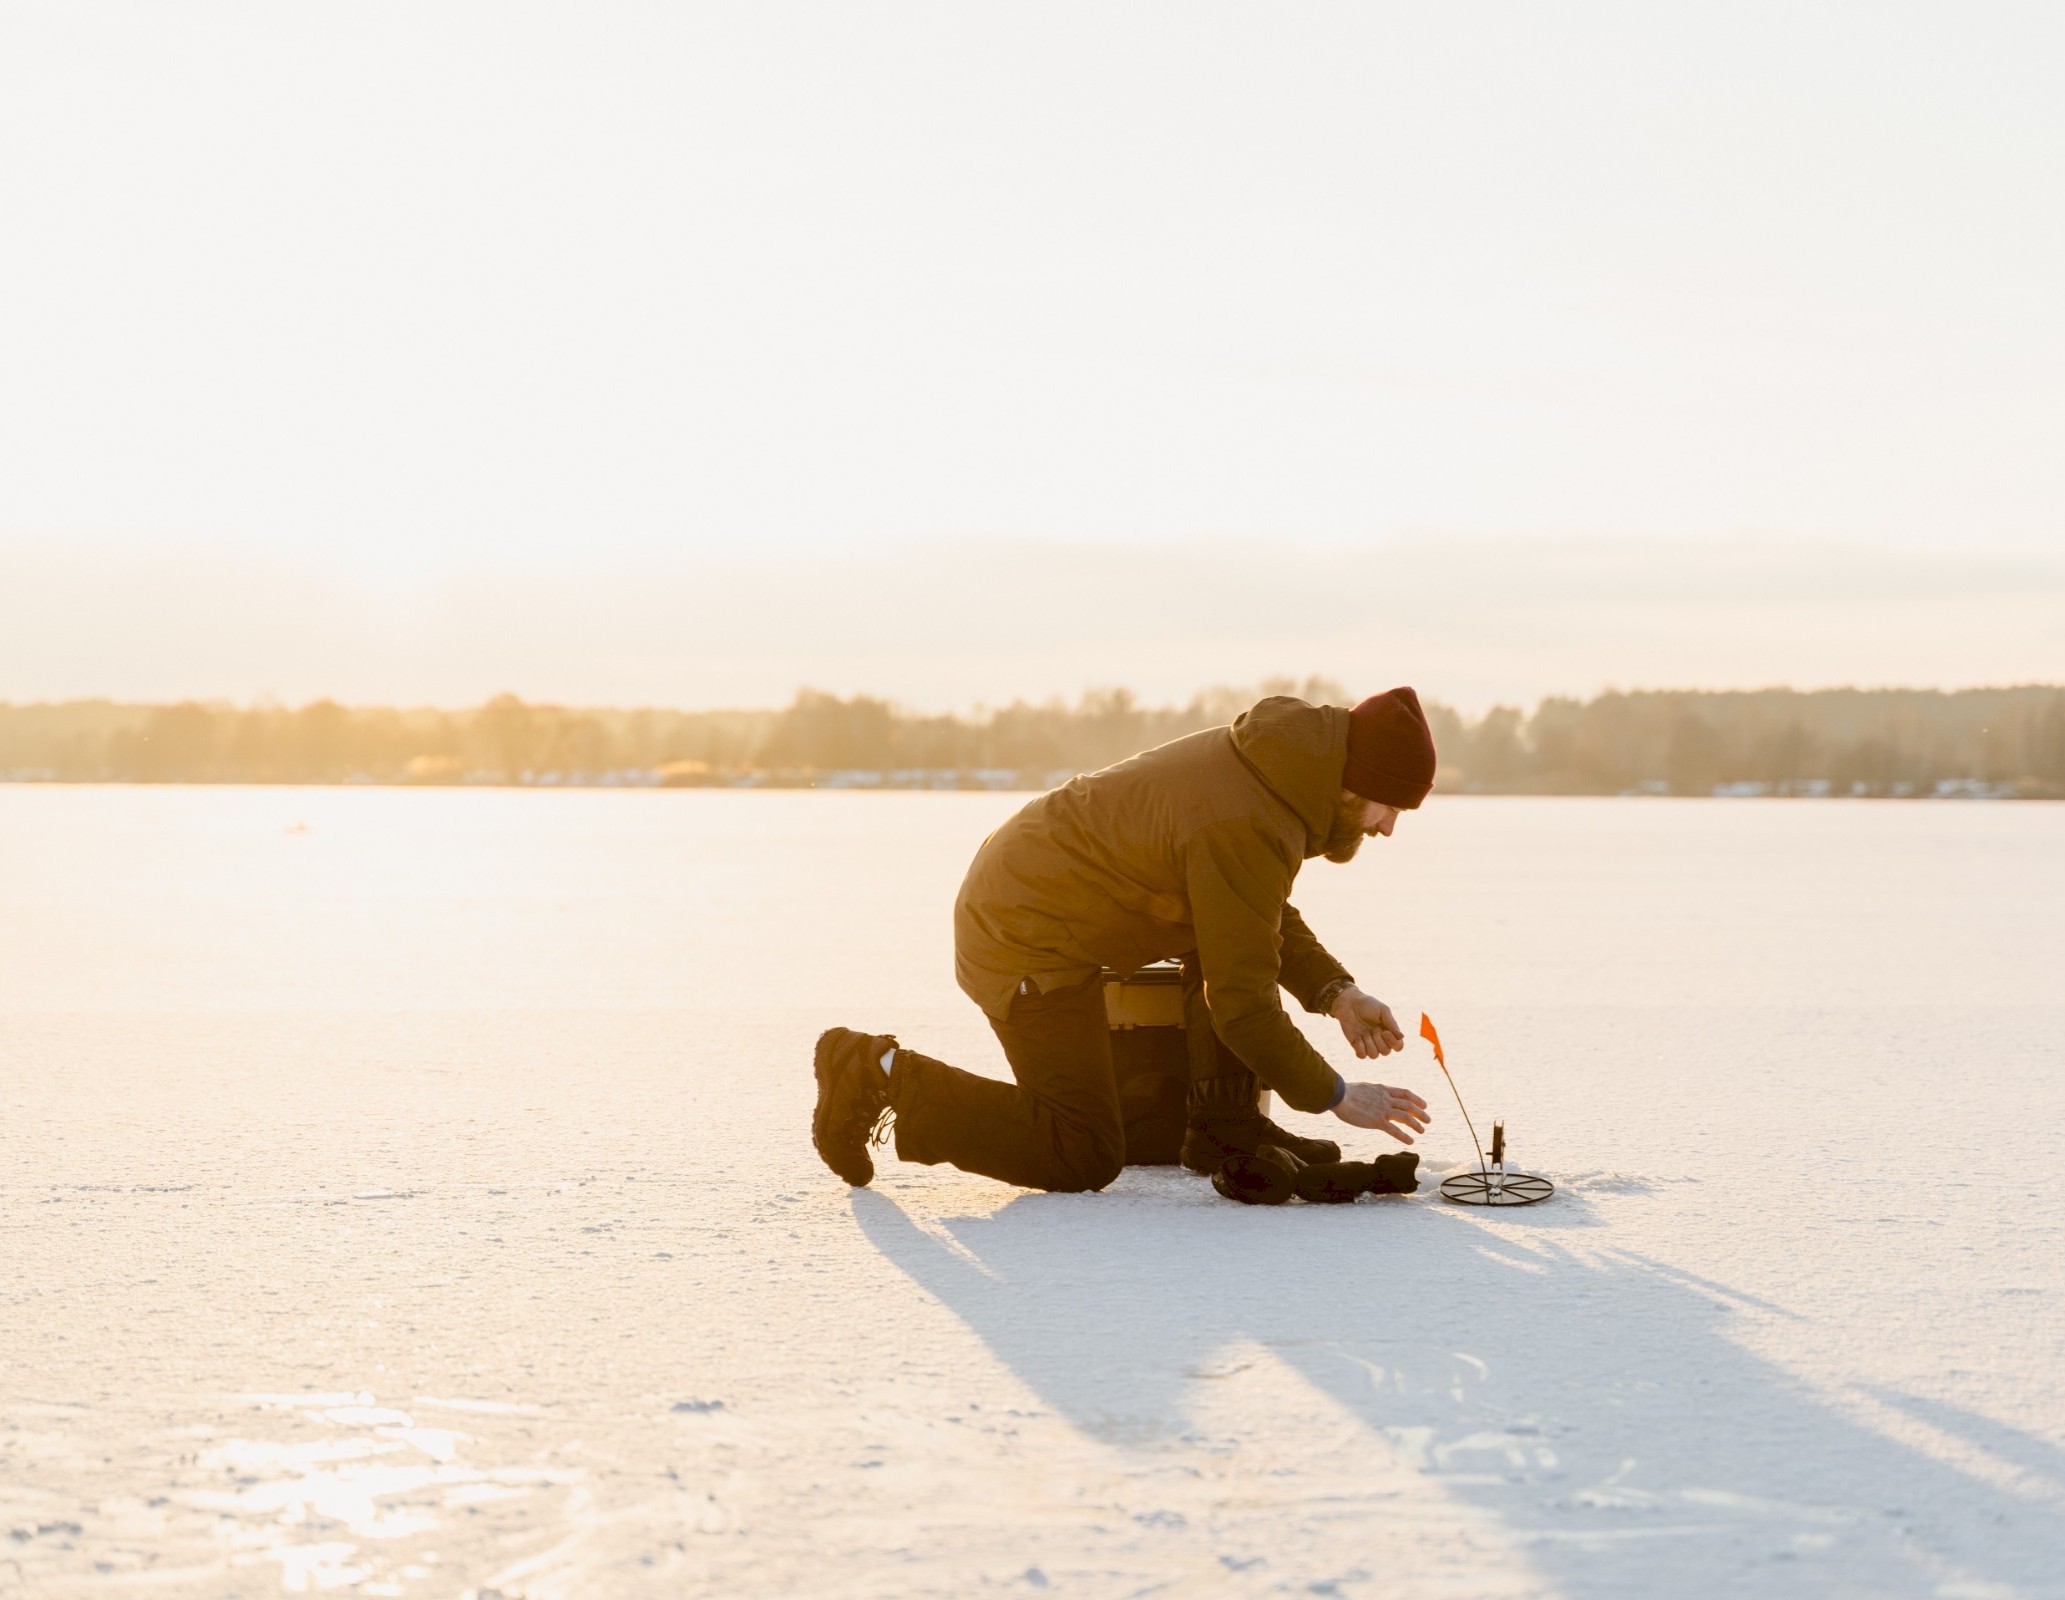 A man ice-fishing on the lake